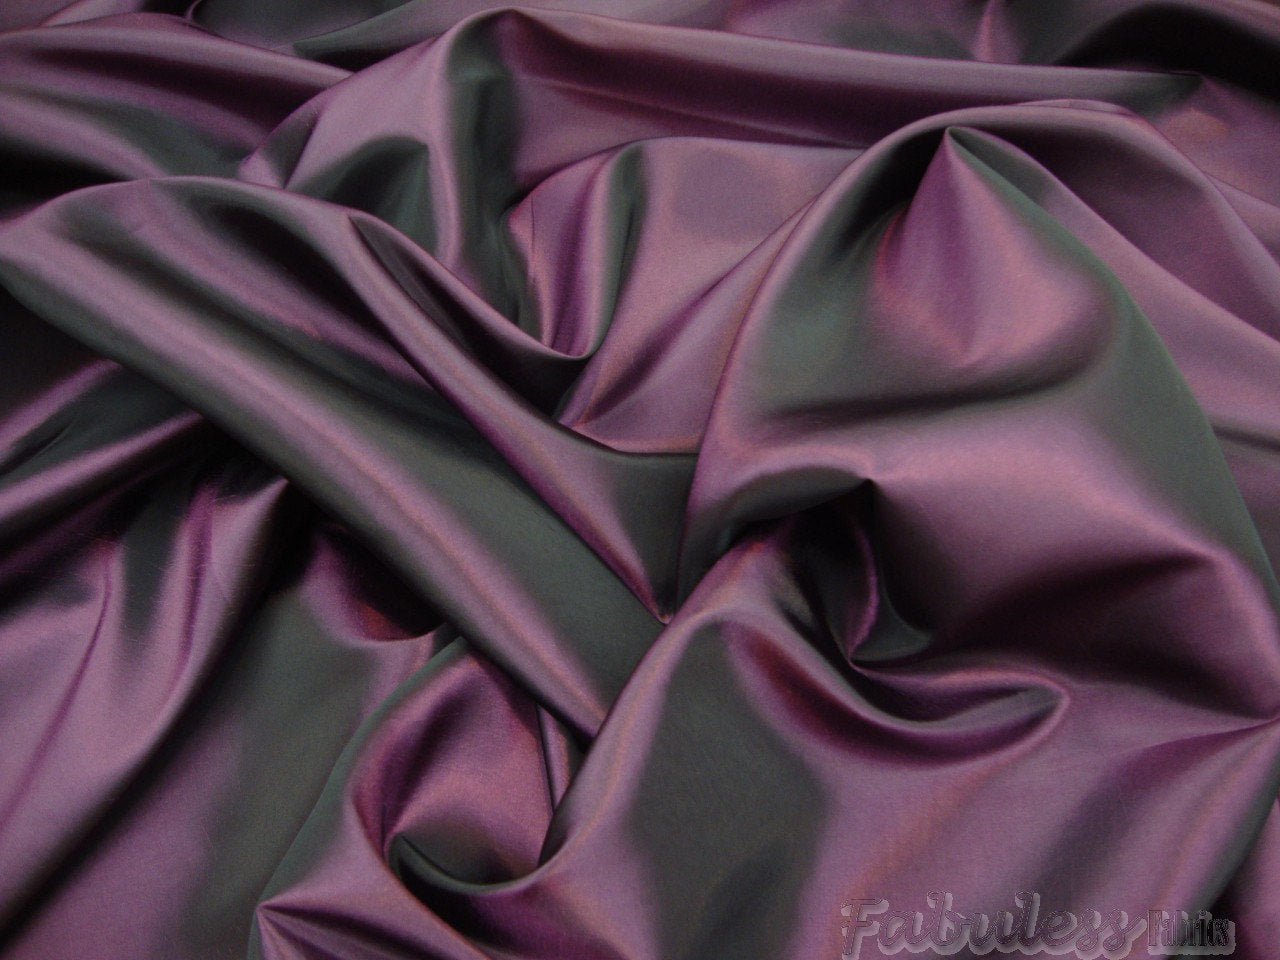 Eggplant Iridescent Polyester Taffeta 60" Wide || Fabric by the Yard